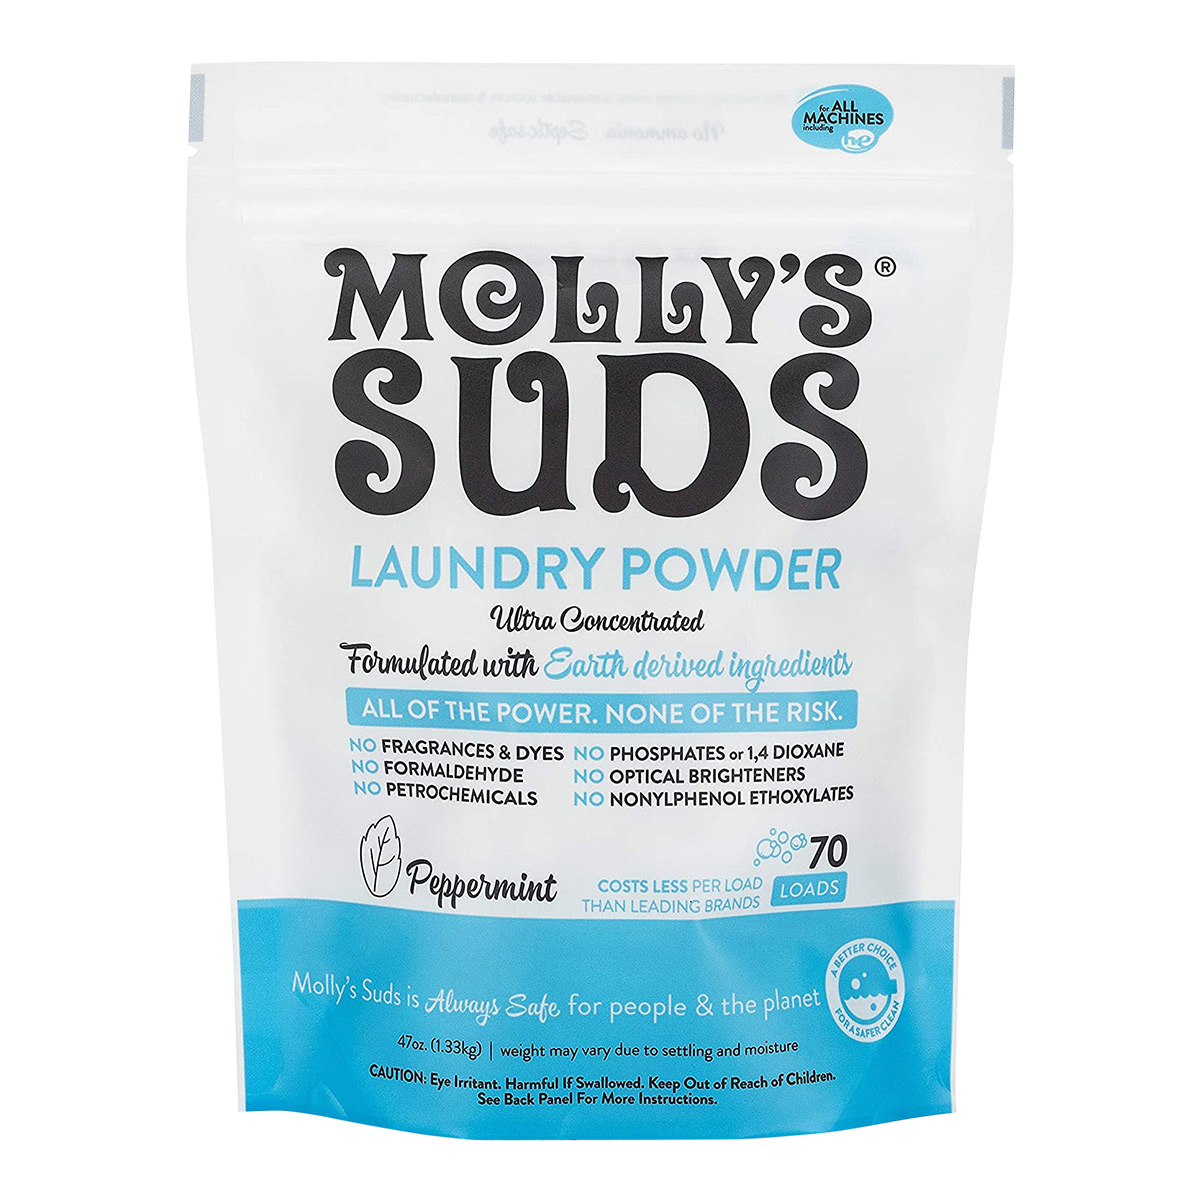 Dr Suds Laundry Powder - Variety 3 Pack (192 oz Total) Three 64 oz Pouches  - Unscented, Lavender, Eucalyptus (3)